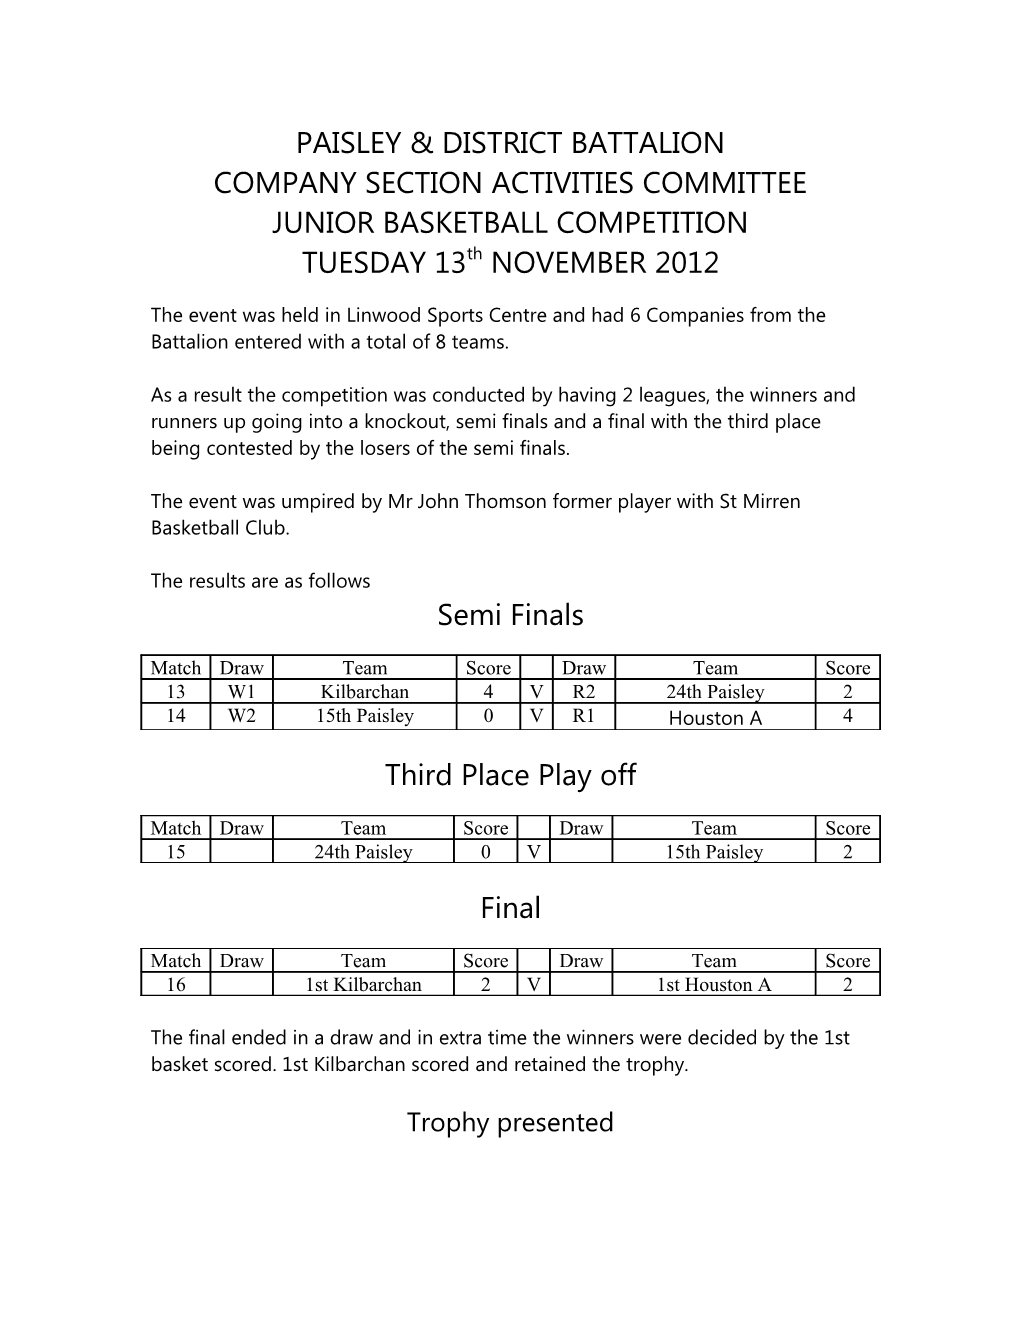 Company Section Activities Committee